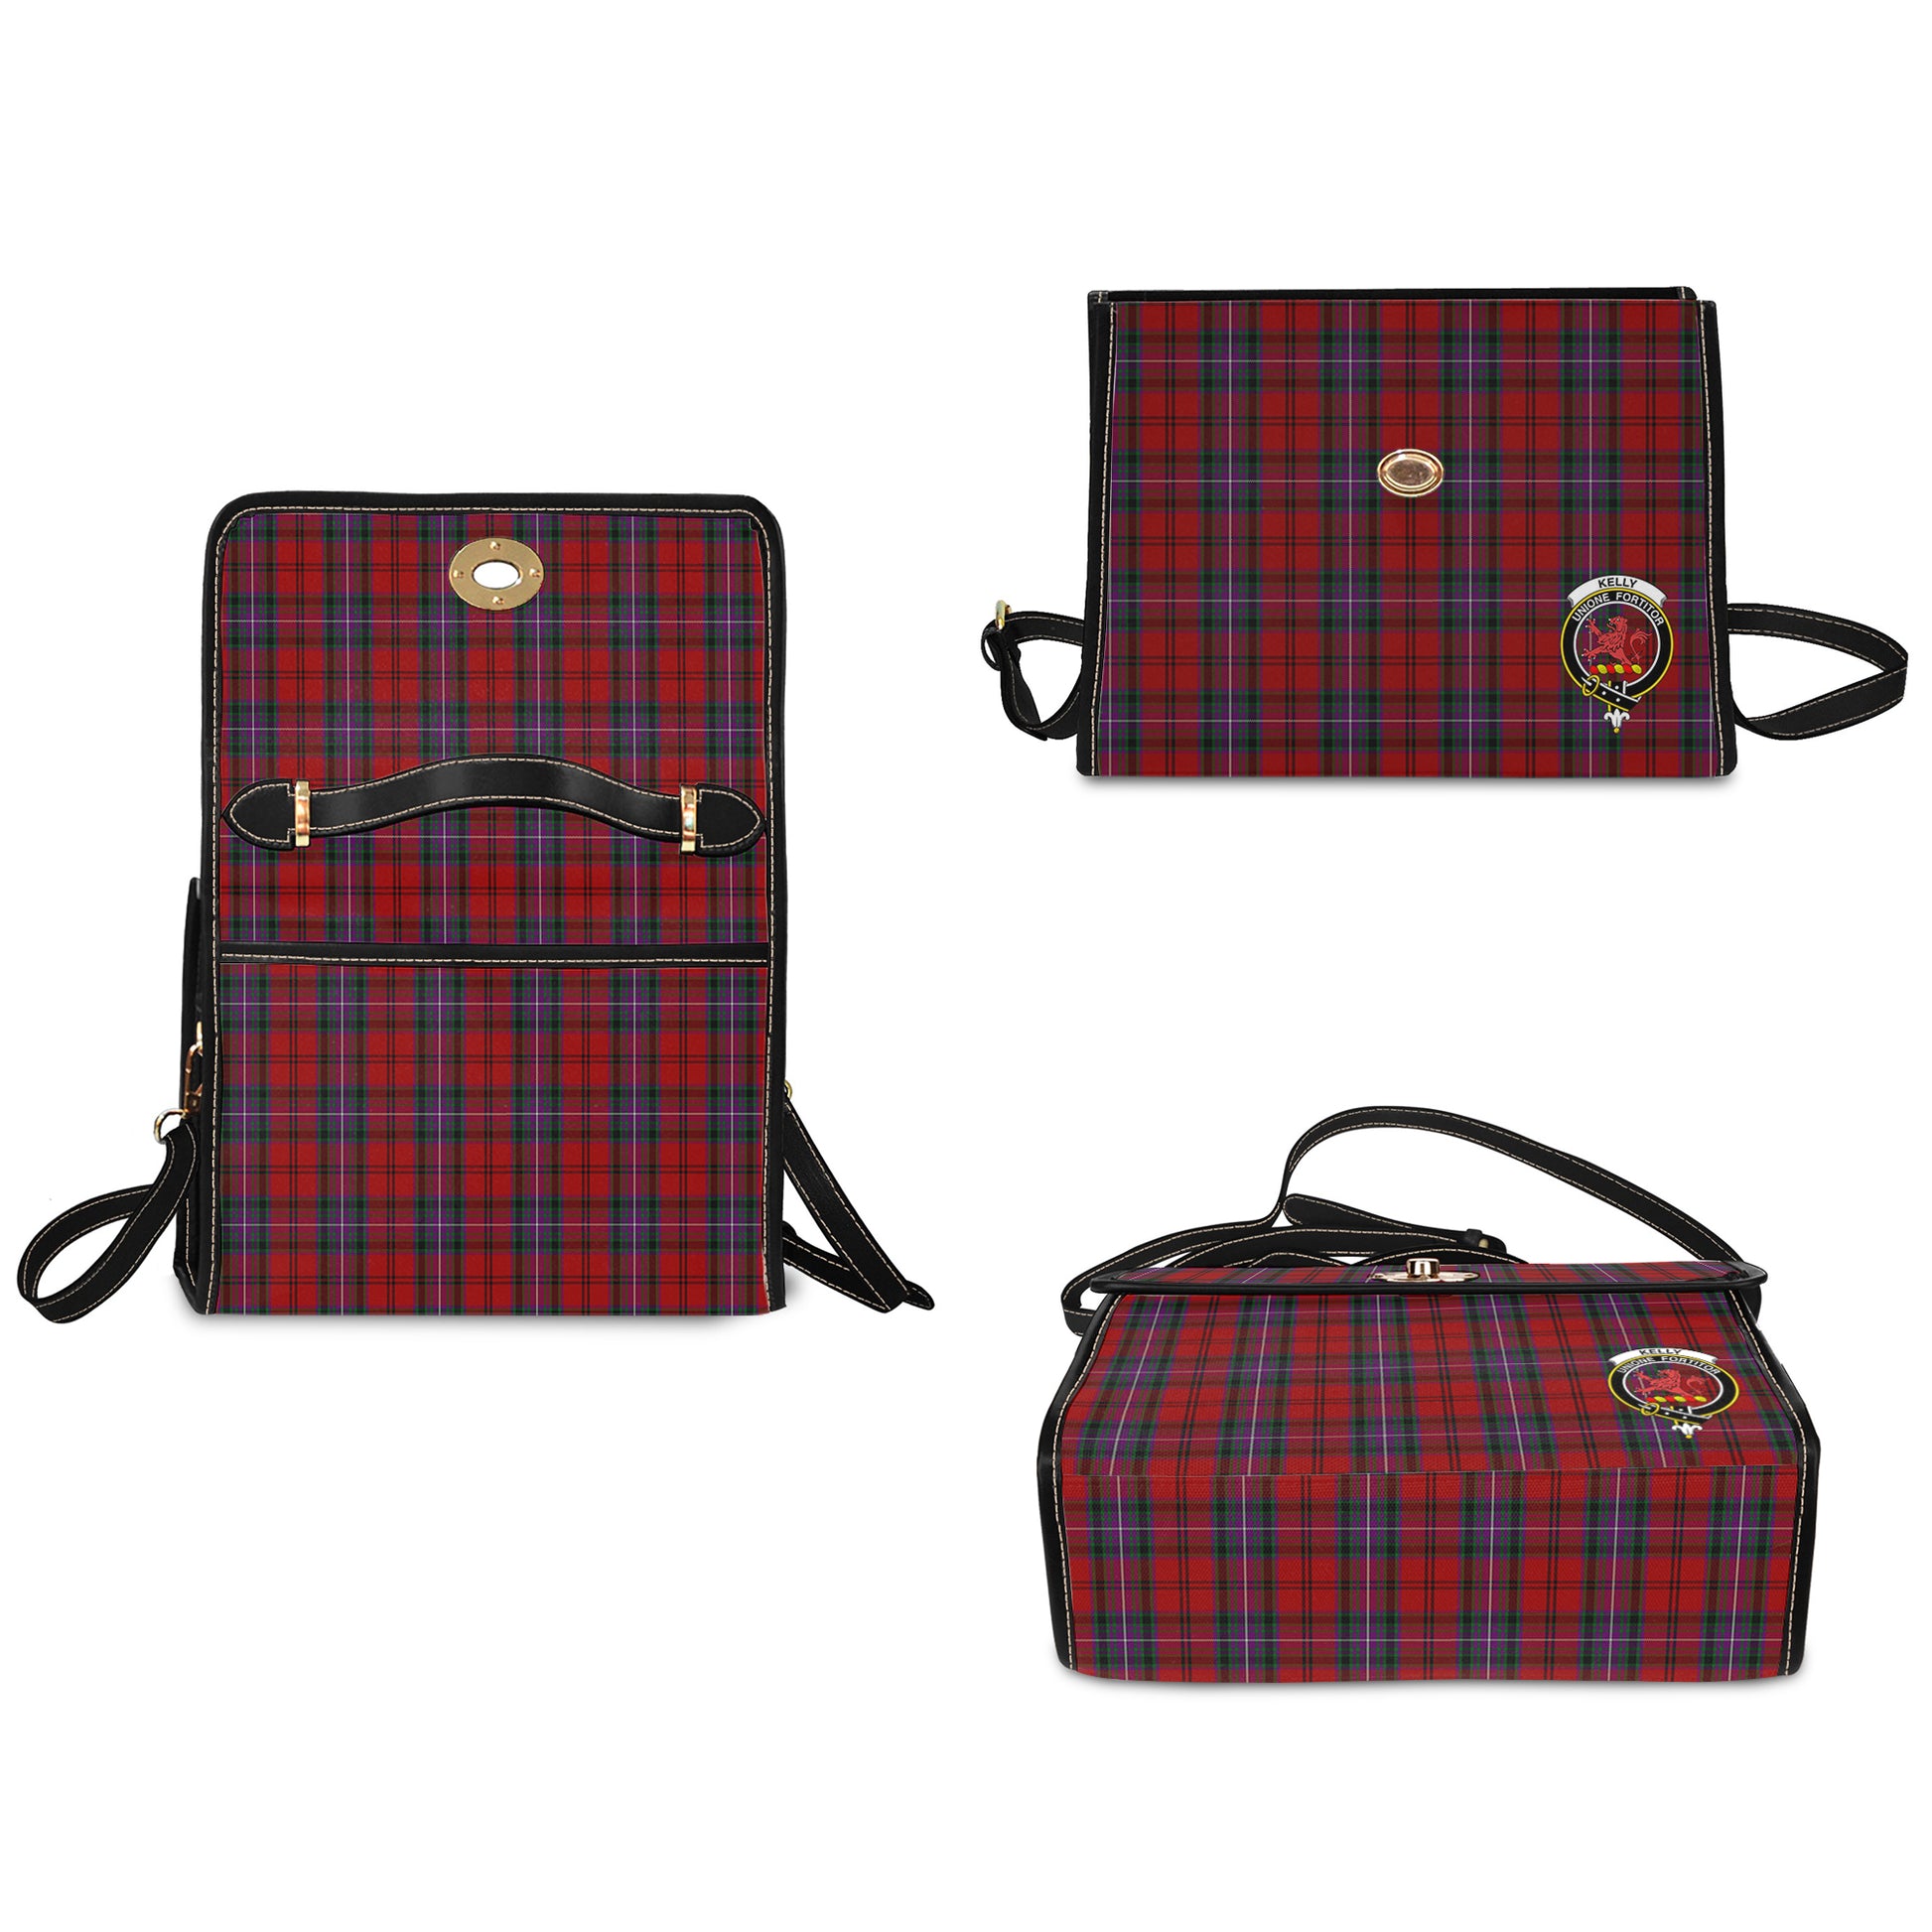 kelly-of-sleat-red-tartan-leather-strap-waterproof-canvas-bag-with-family-crest